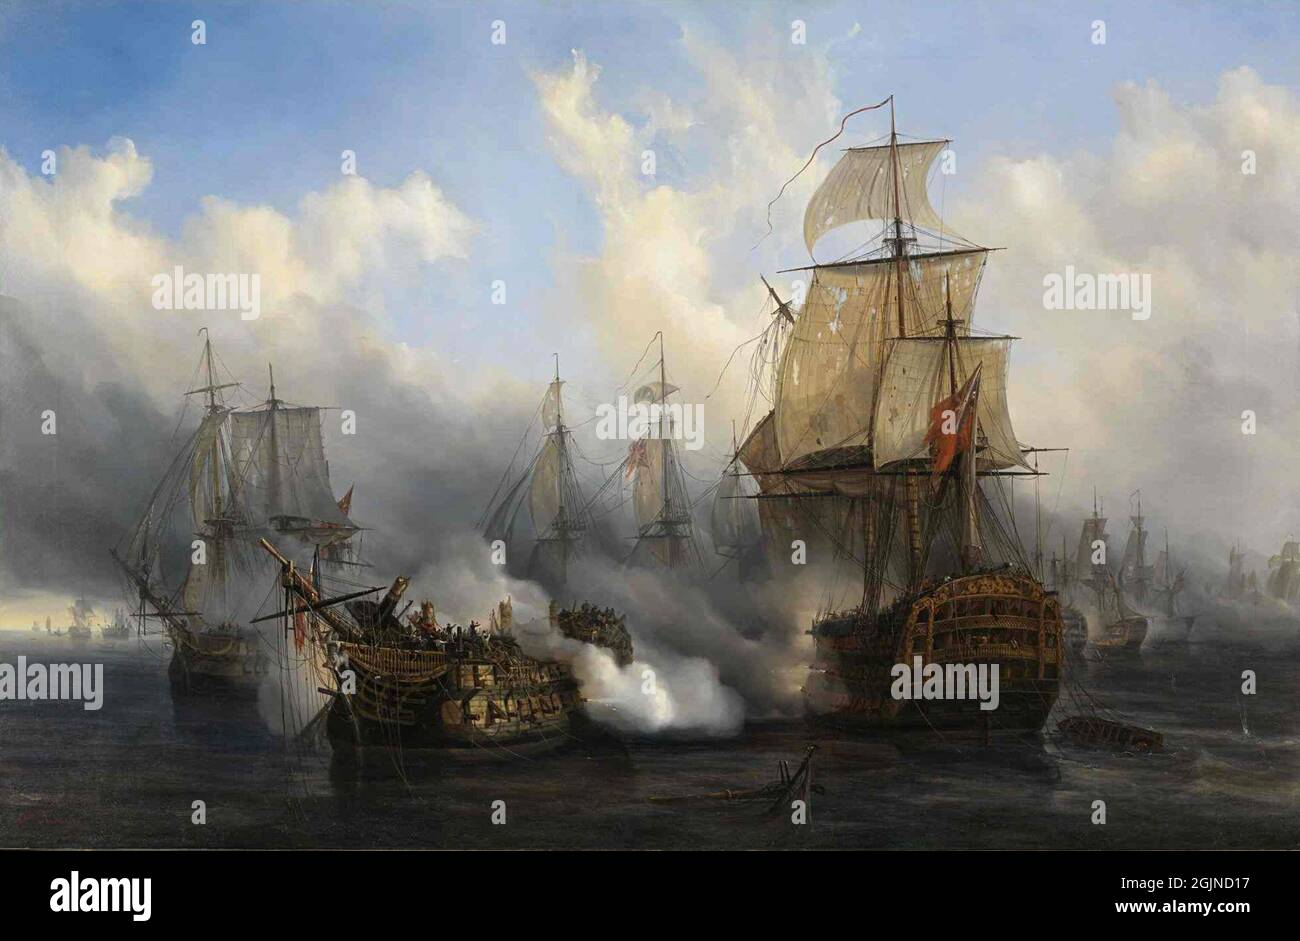 Scenes from The Battle of Trafalgar, in which the French Navy was destroyed. HMS Sandwich fighting the French flagship Bucentaure (completely dismasted). Bucentaure is also fighting HMS Temeraire (on the left) and being fired into by HMS Victory (behind her). Painting by Auguste Mayer Stock Photo